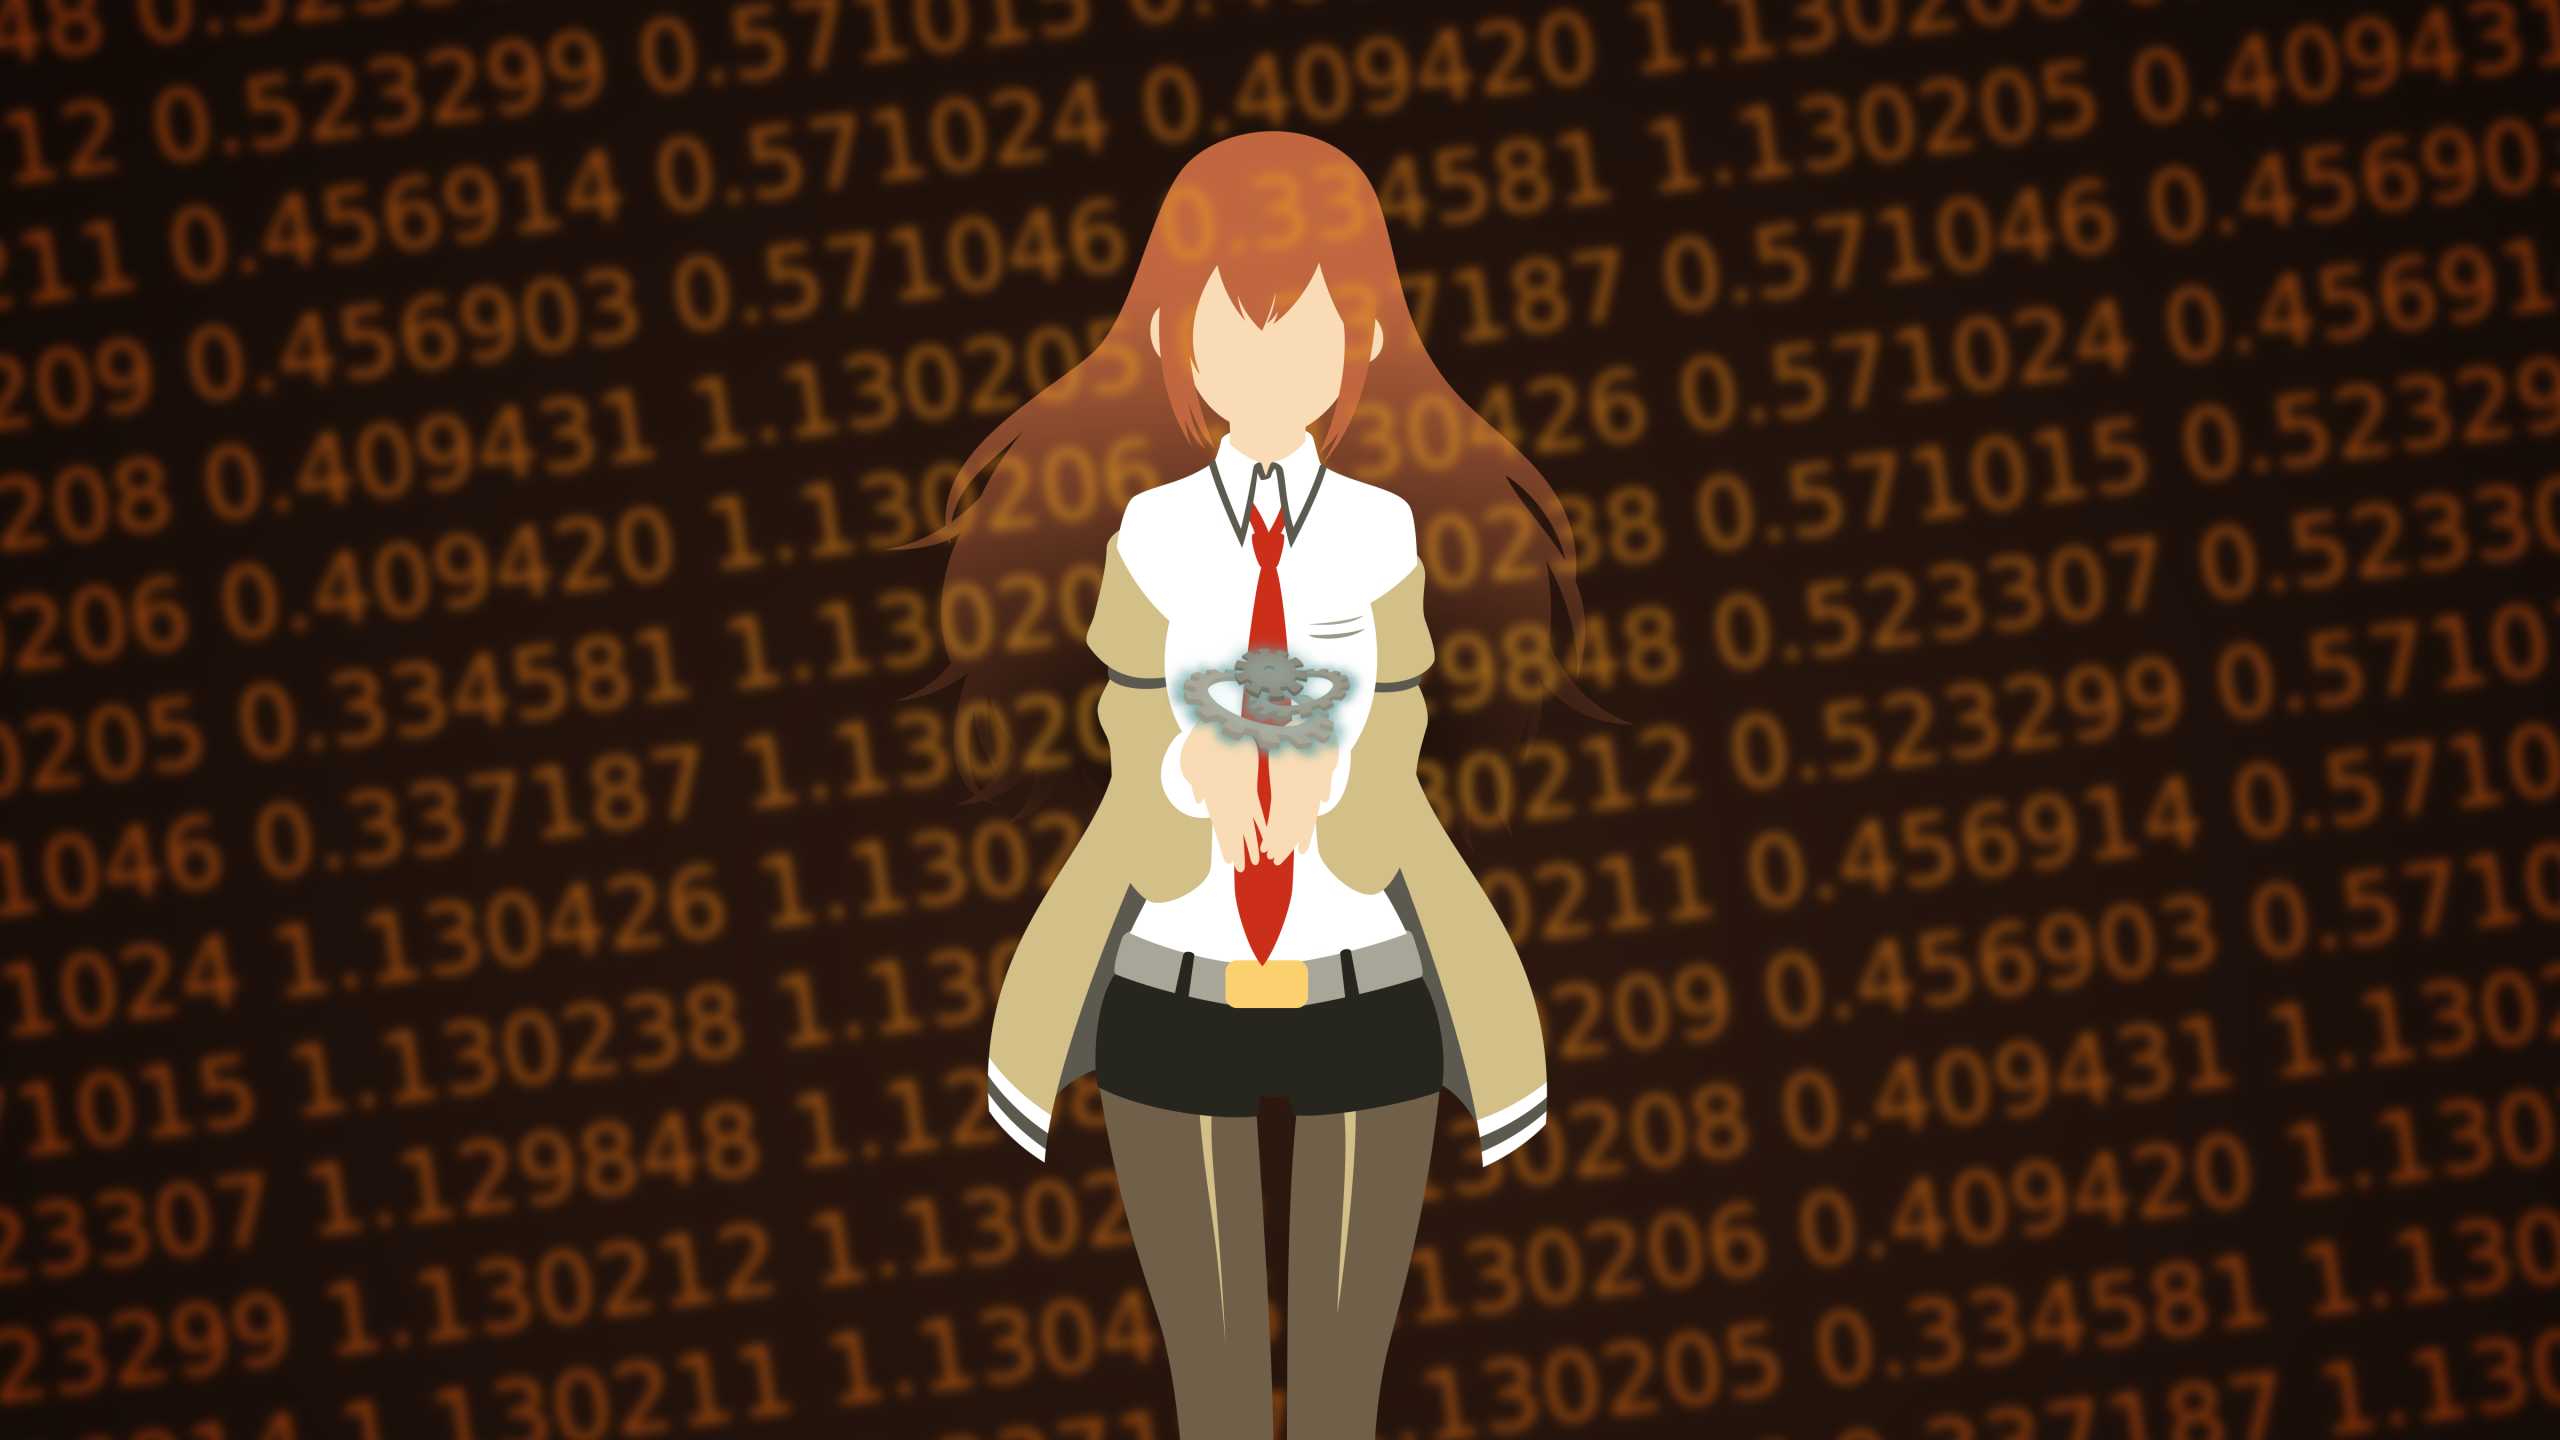 Anime Steins;Gate 0 HD Wallpaper | Background Image